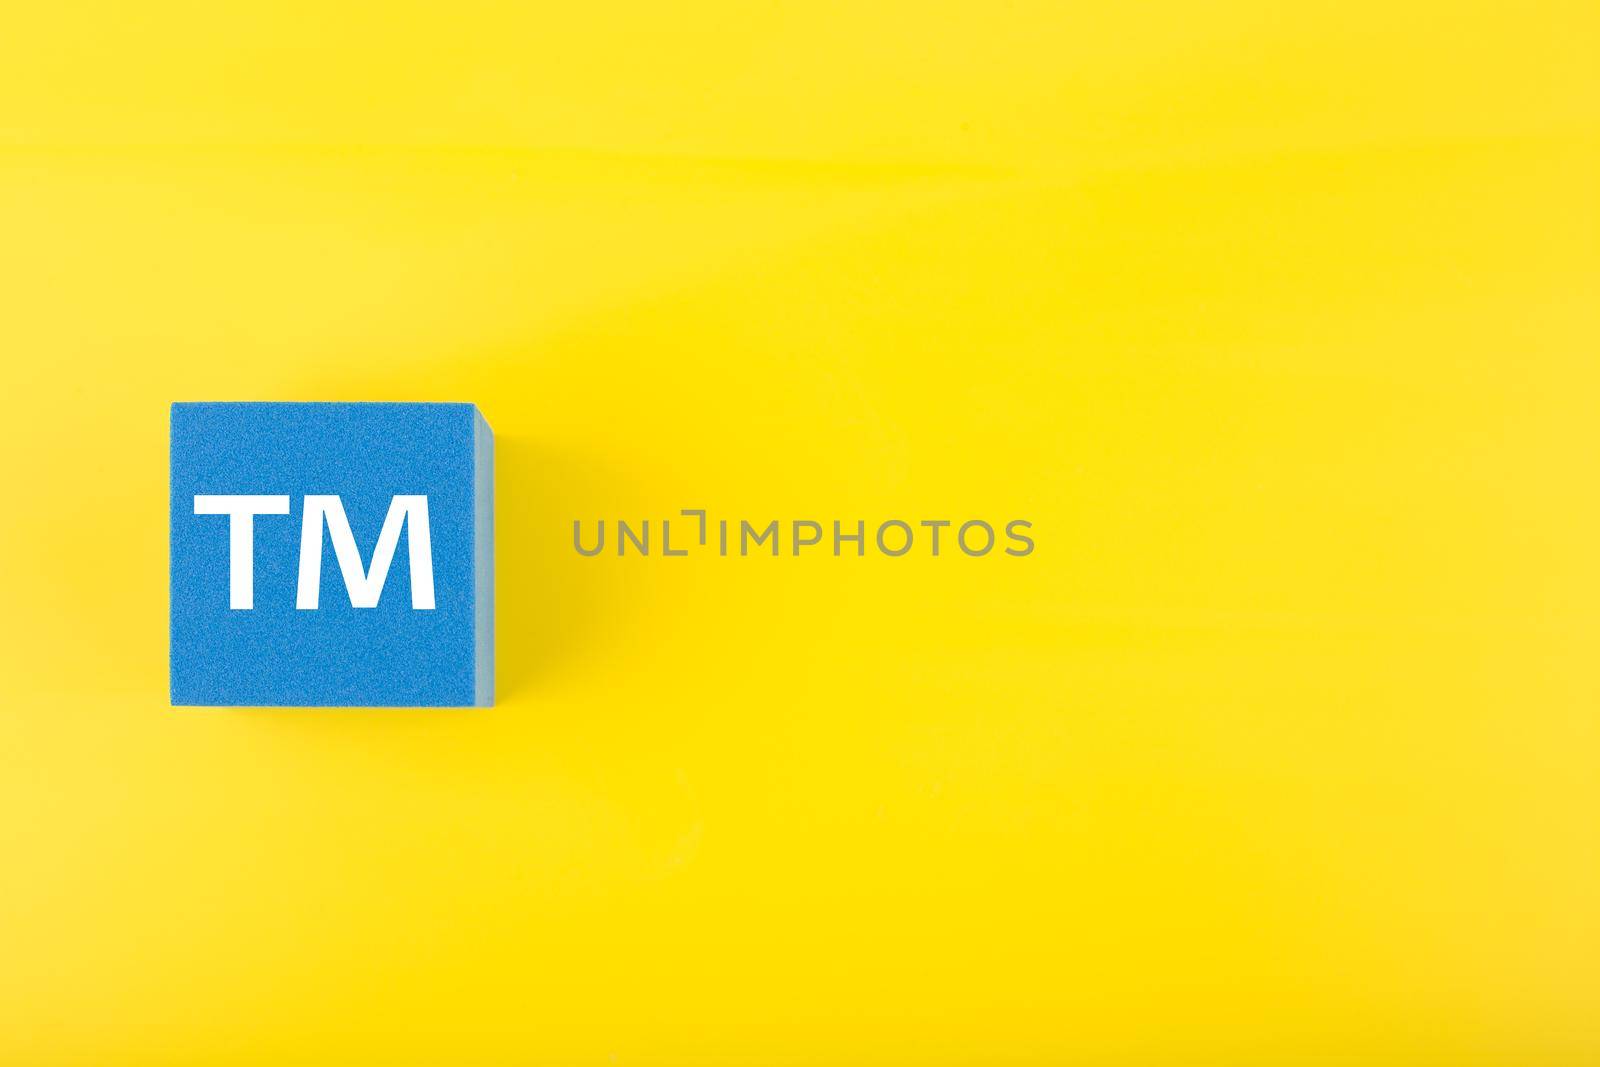 TM trademark sign on blue toy cube on yellow background with copy space by Senorina_Irina